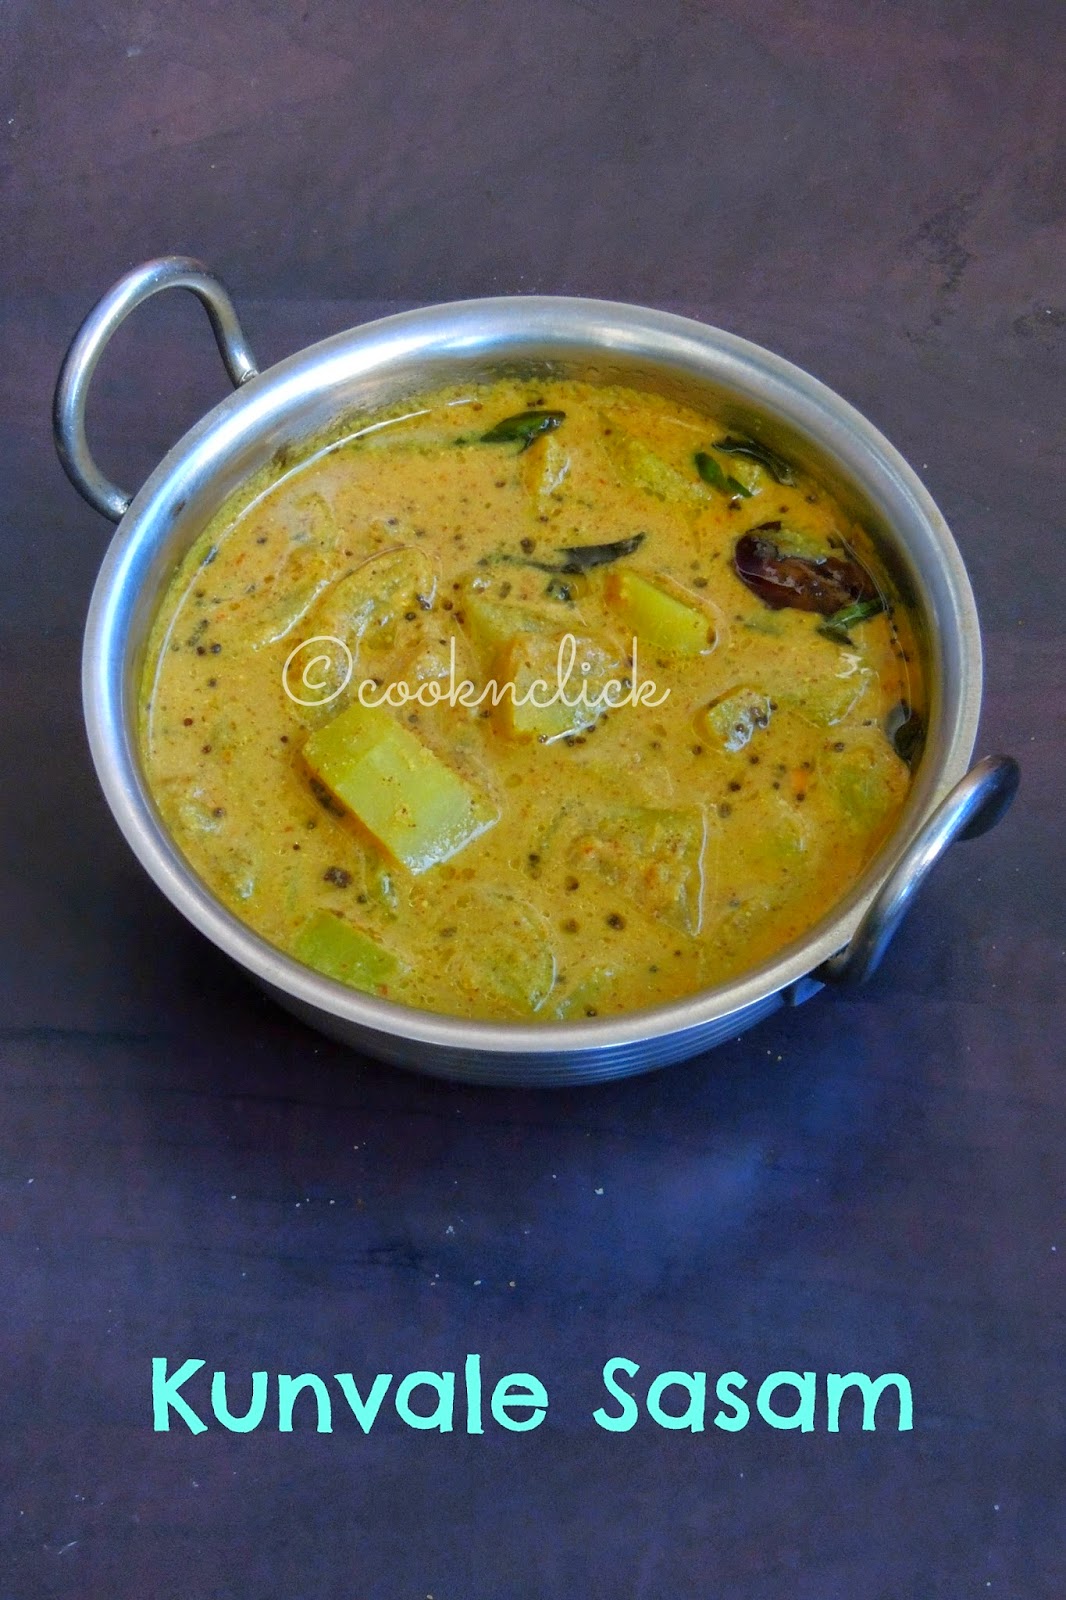 Ashgourd curry without onion and garlic, Kunvale sasam